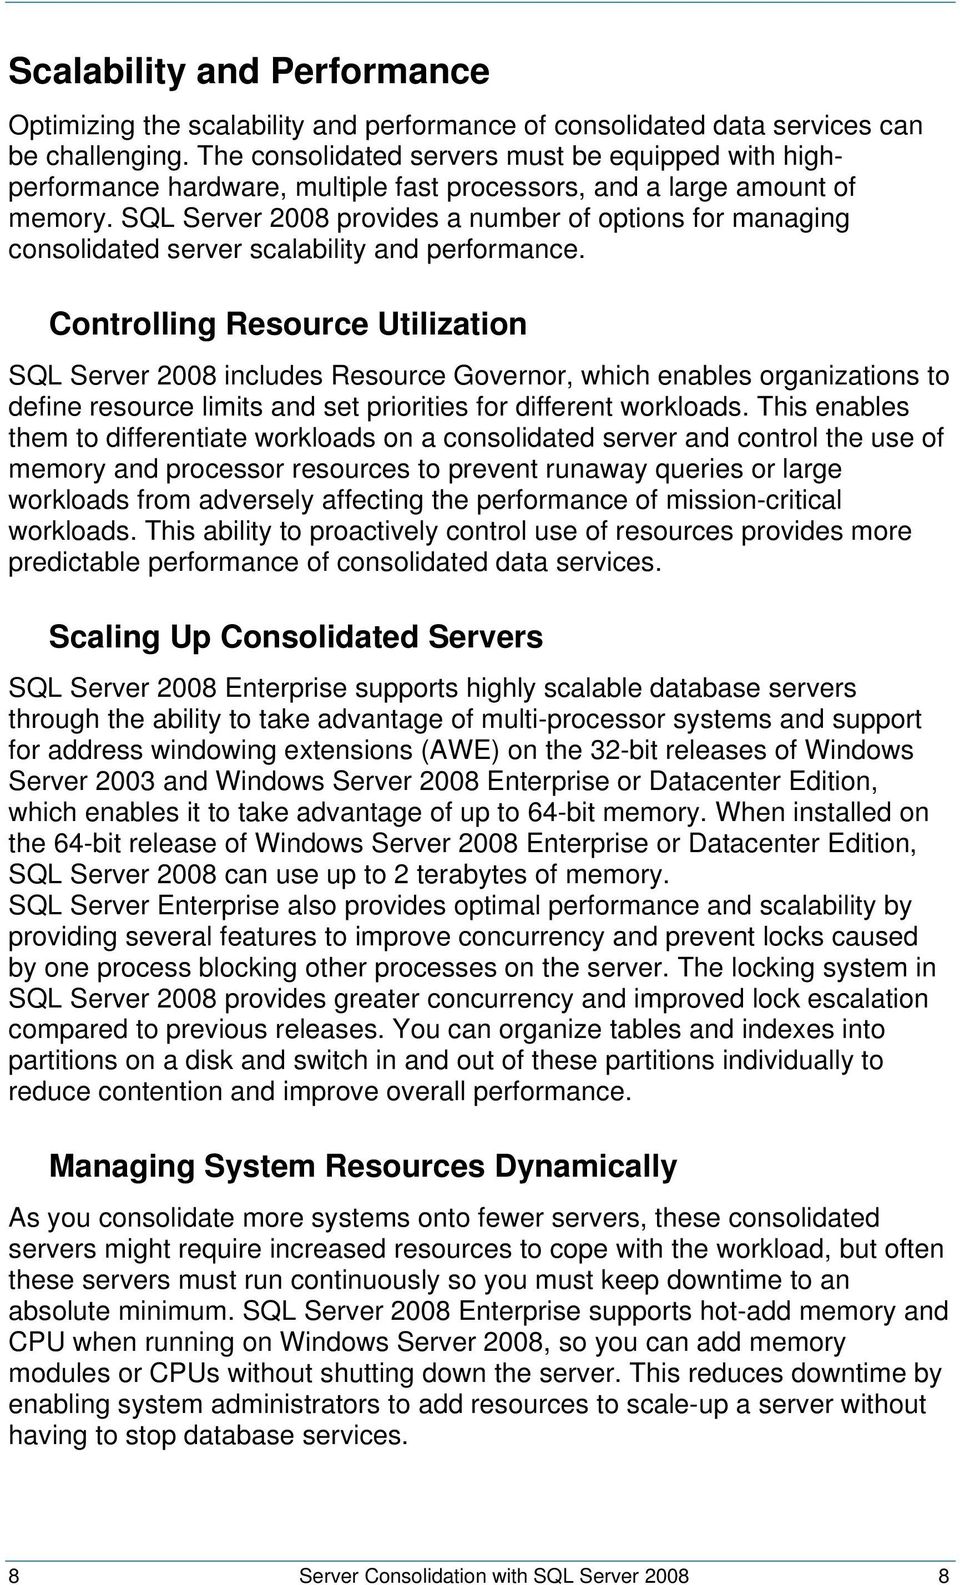 SQL Server 2008 provides a number of options for managing consolidated server scalability and performance.